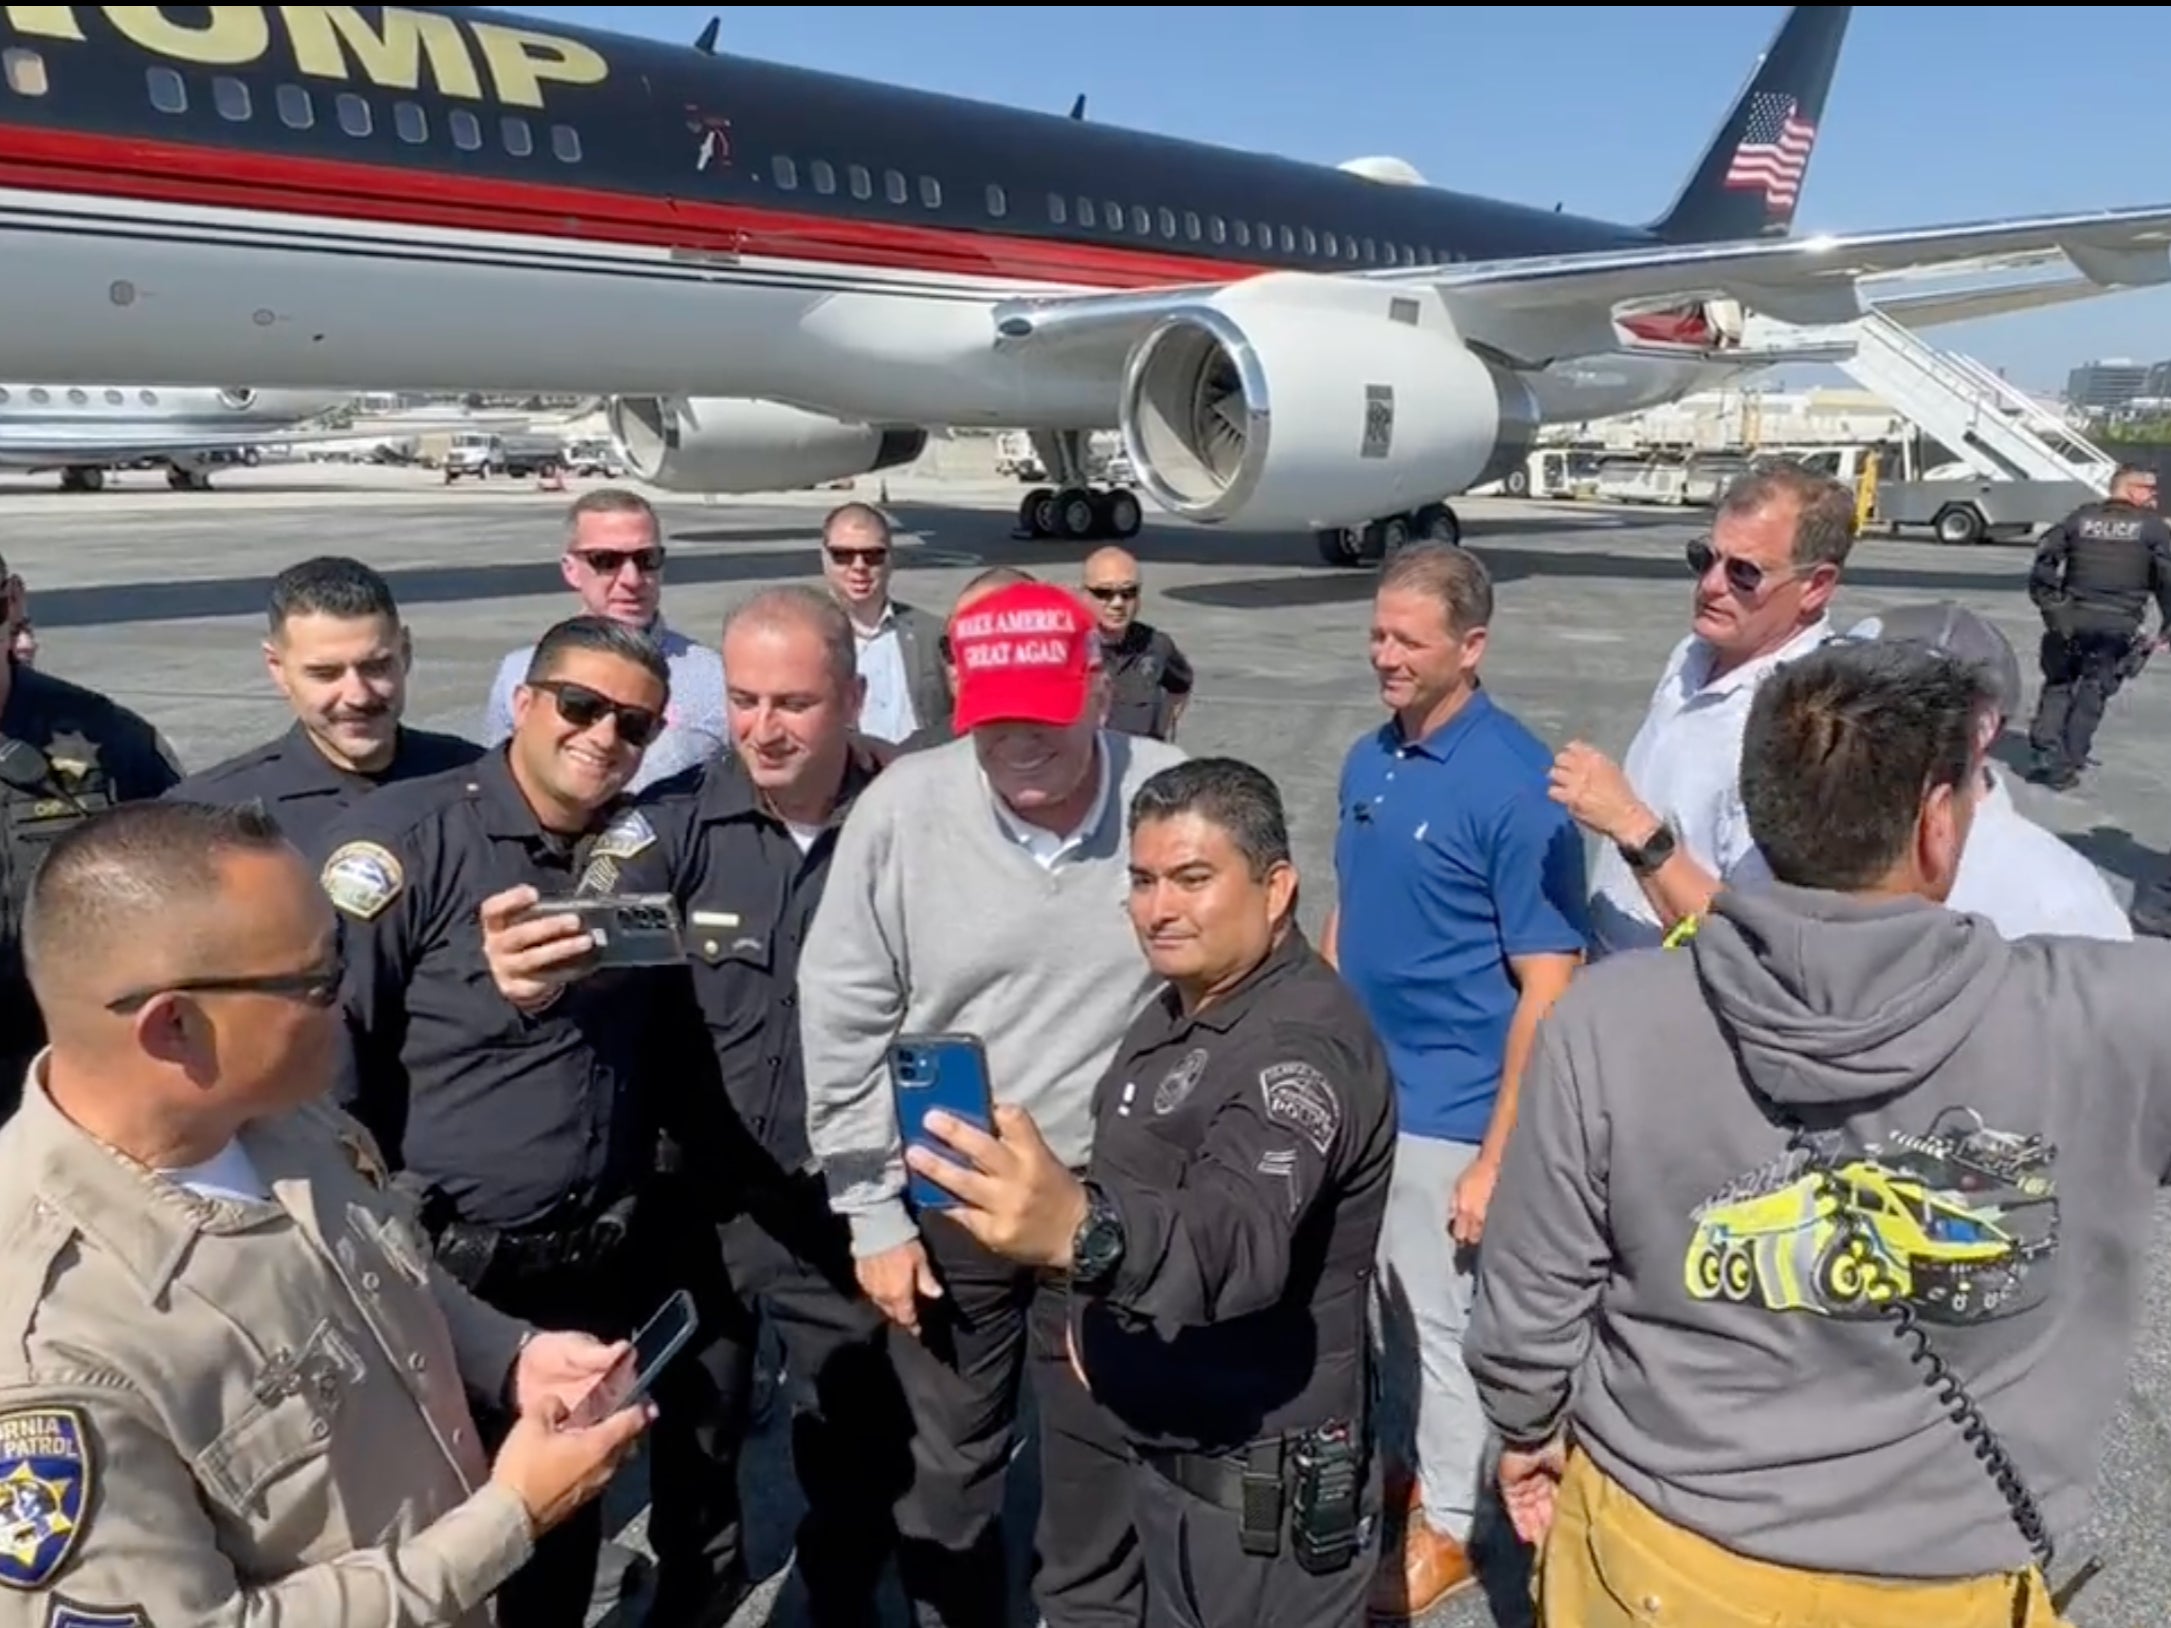 Mr Trump poses for photos with law enforcement officers in Los Angeles